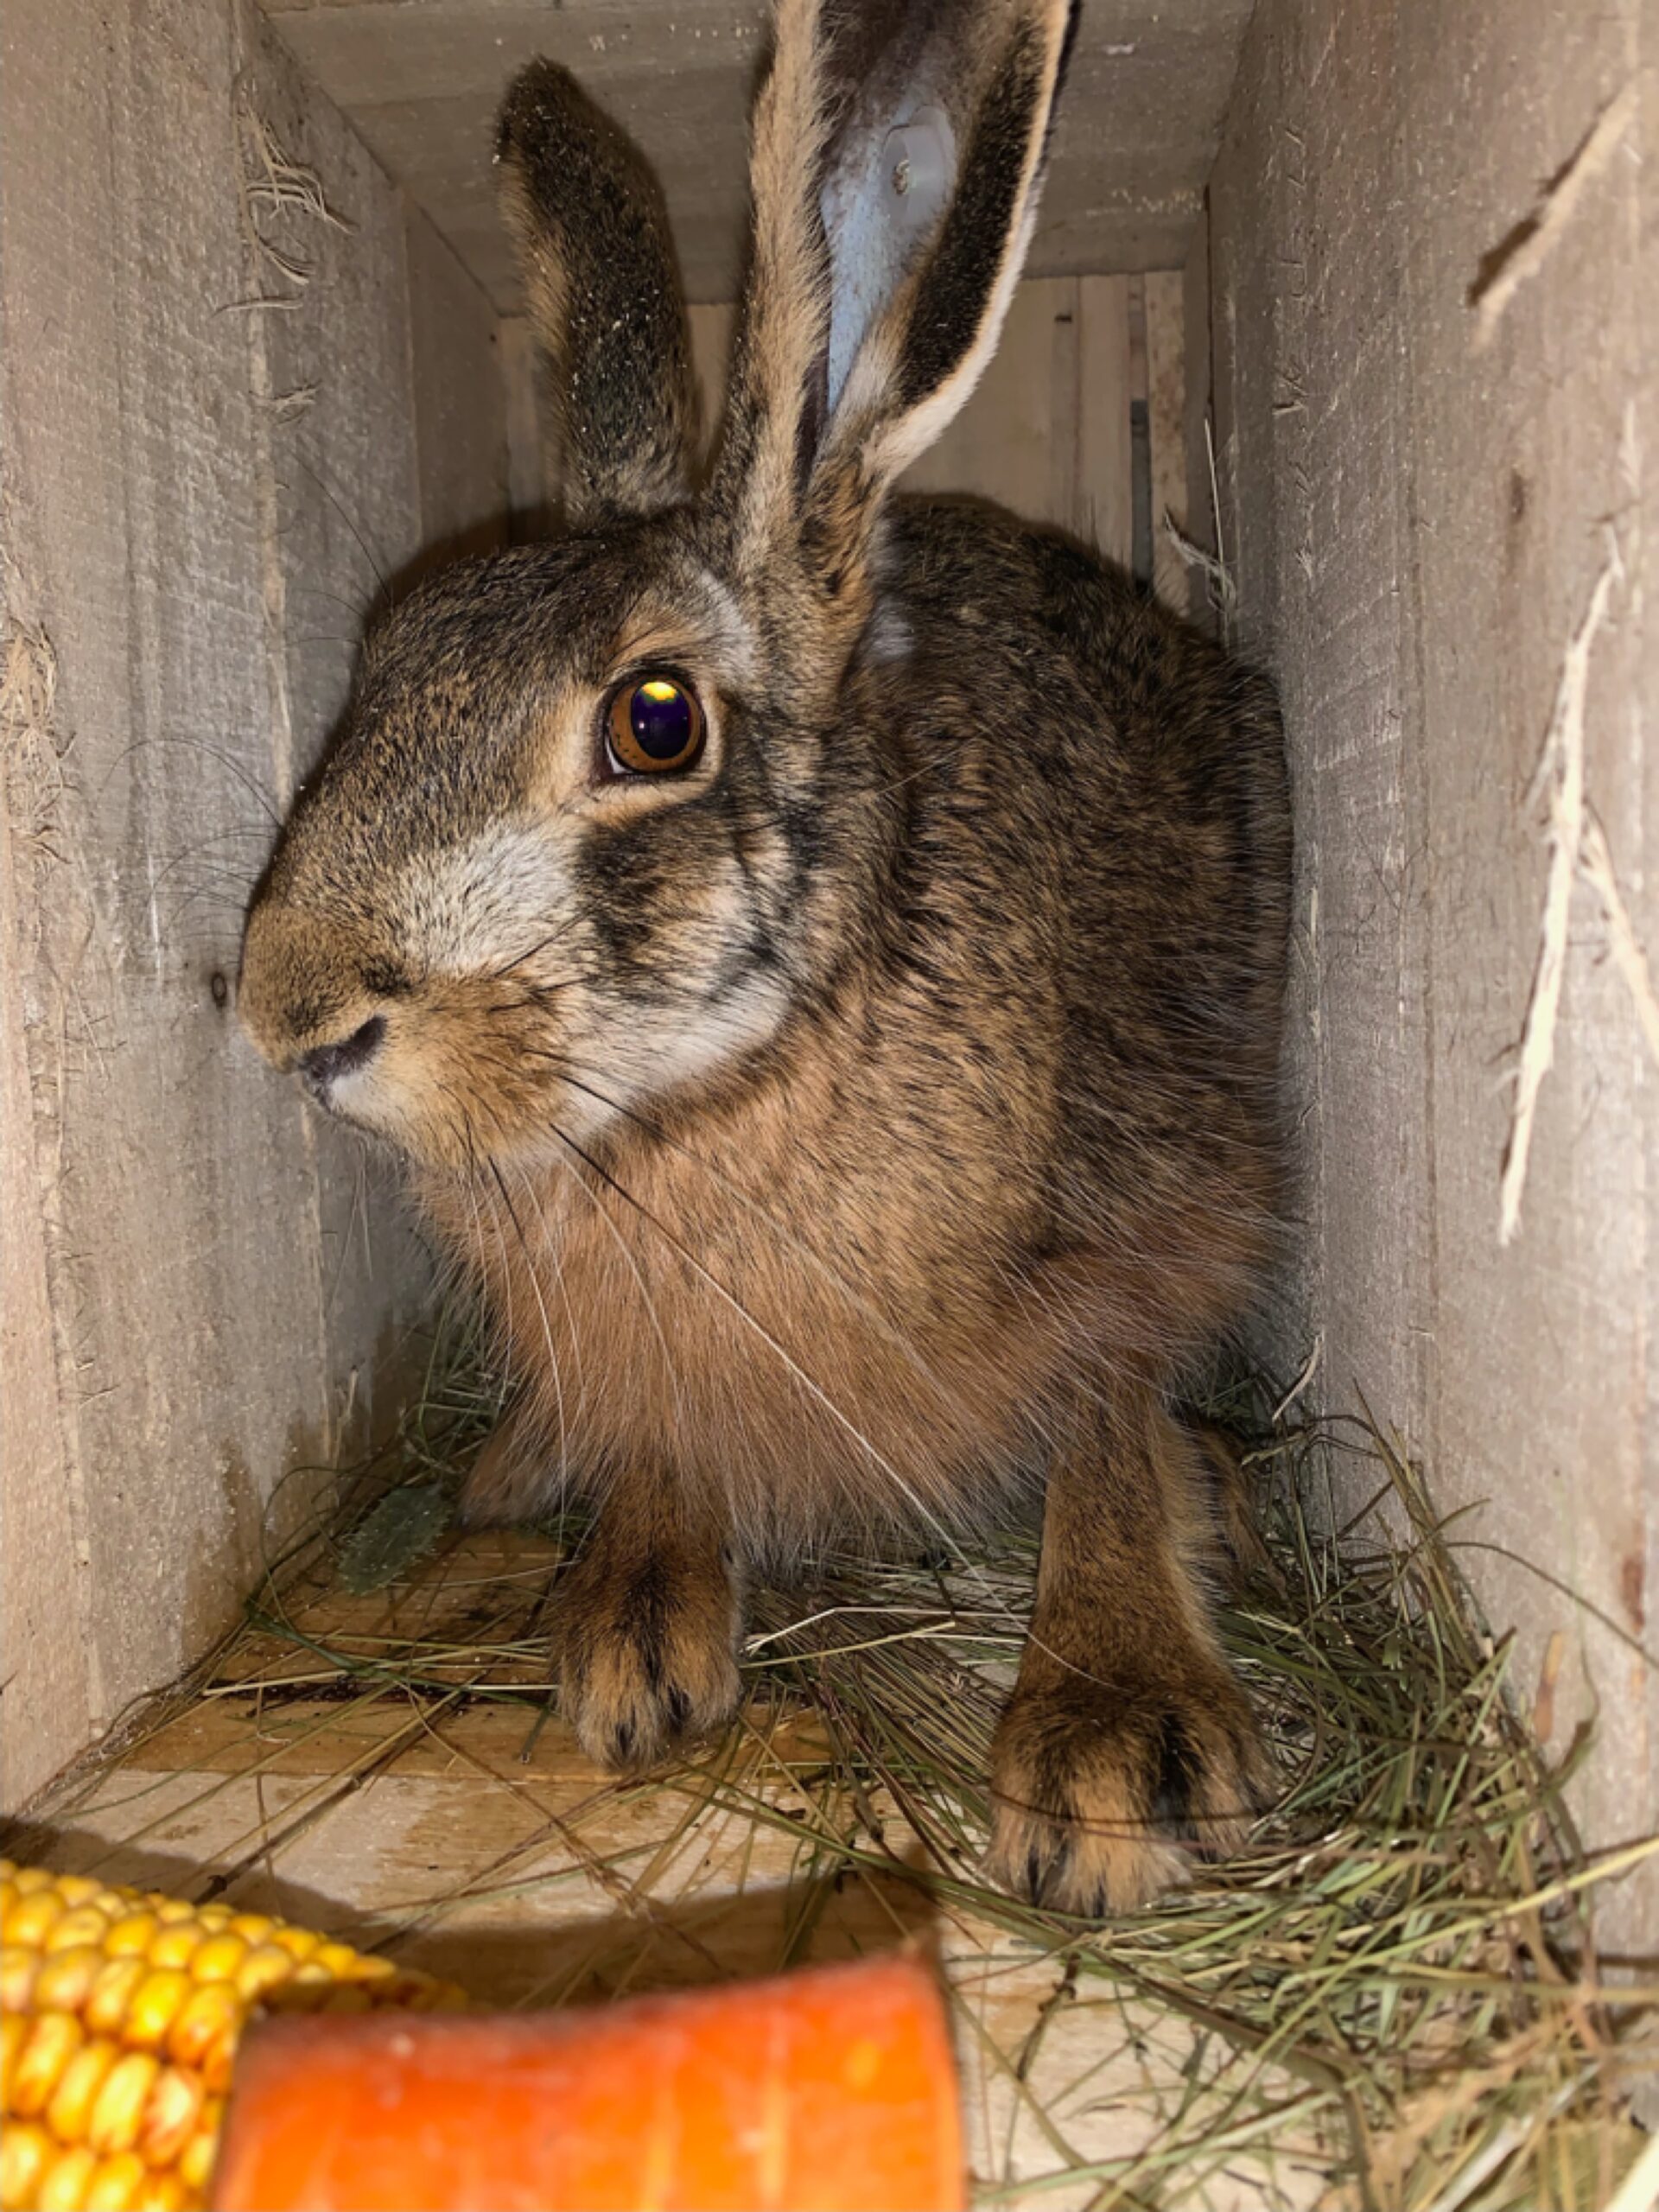 Hare in a transport crate